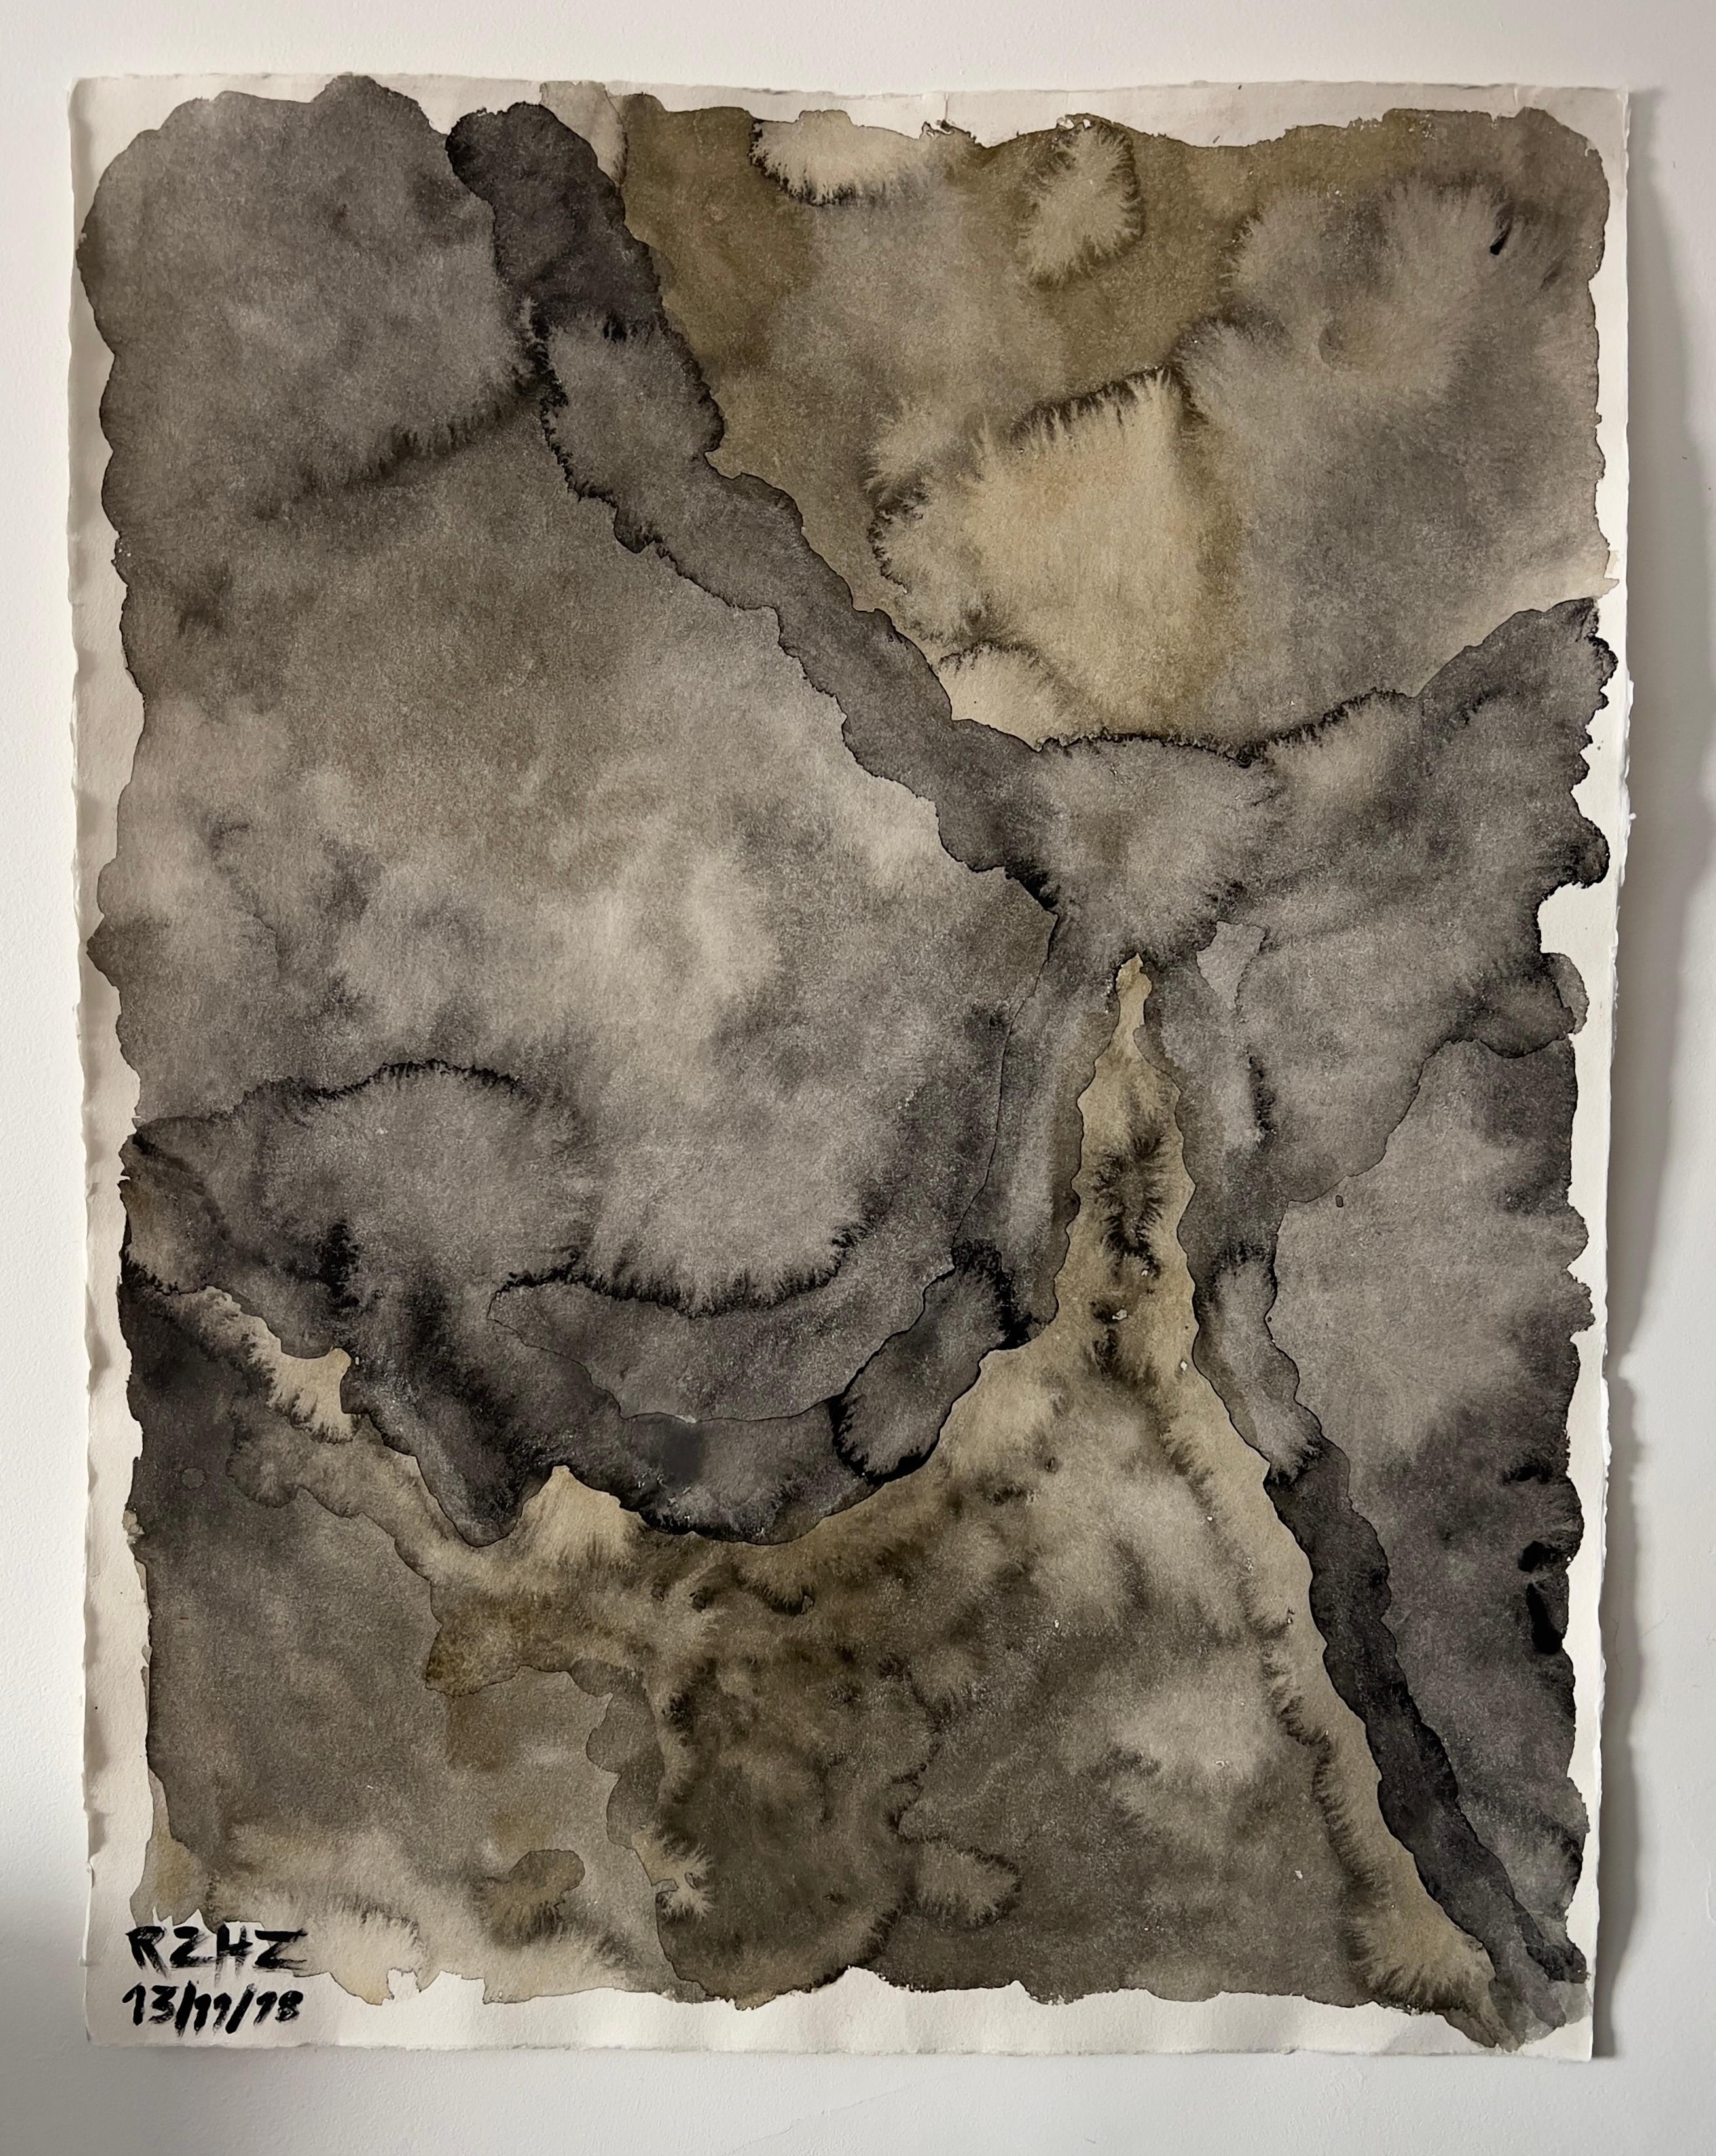 Rodrigo Zuliani Hauck Zampol Abstract Drawing -   No title 1, Watercolor on Hahnemuhle paper